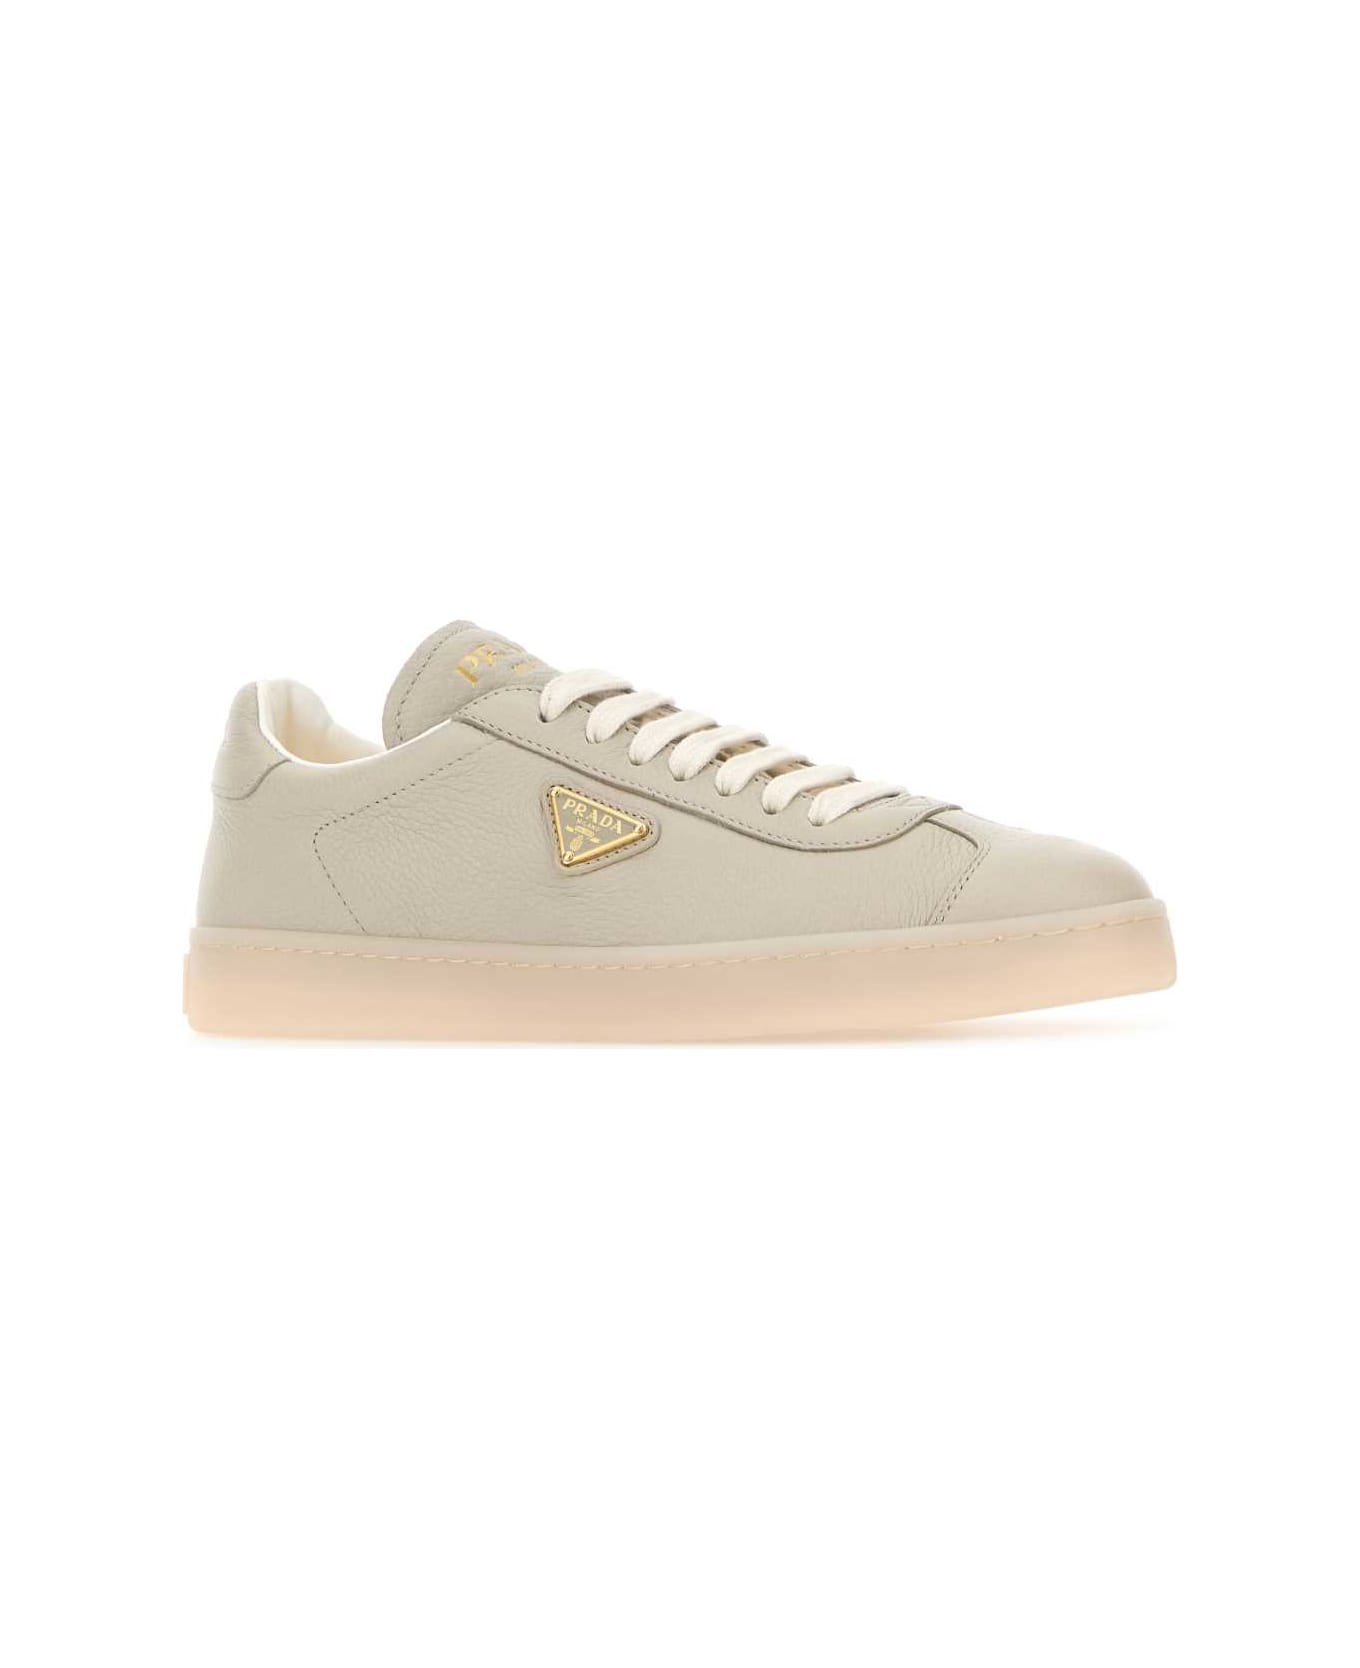 Prada Sand Leather Downtown Sneakers - POMICE スニーカー